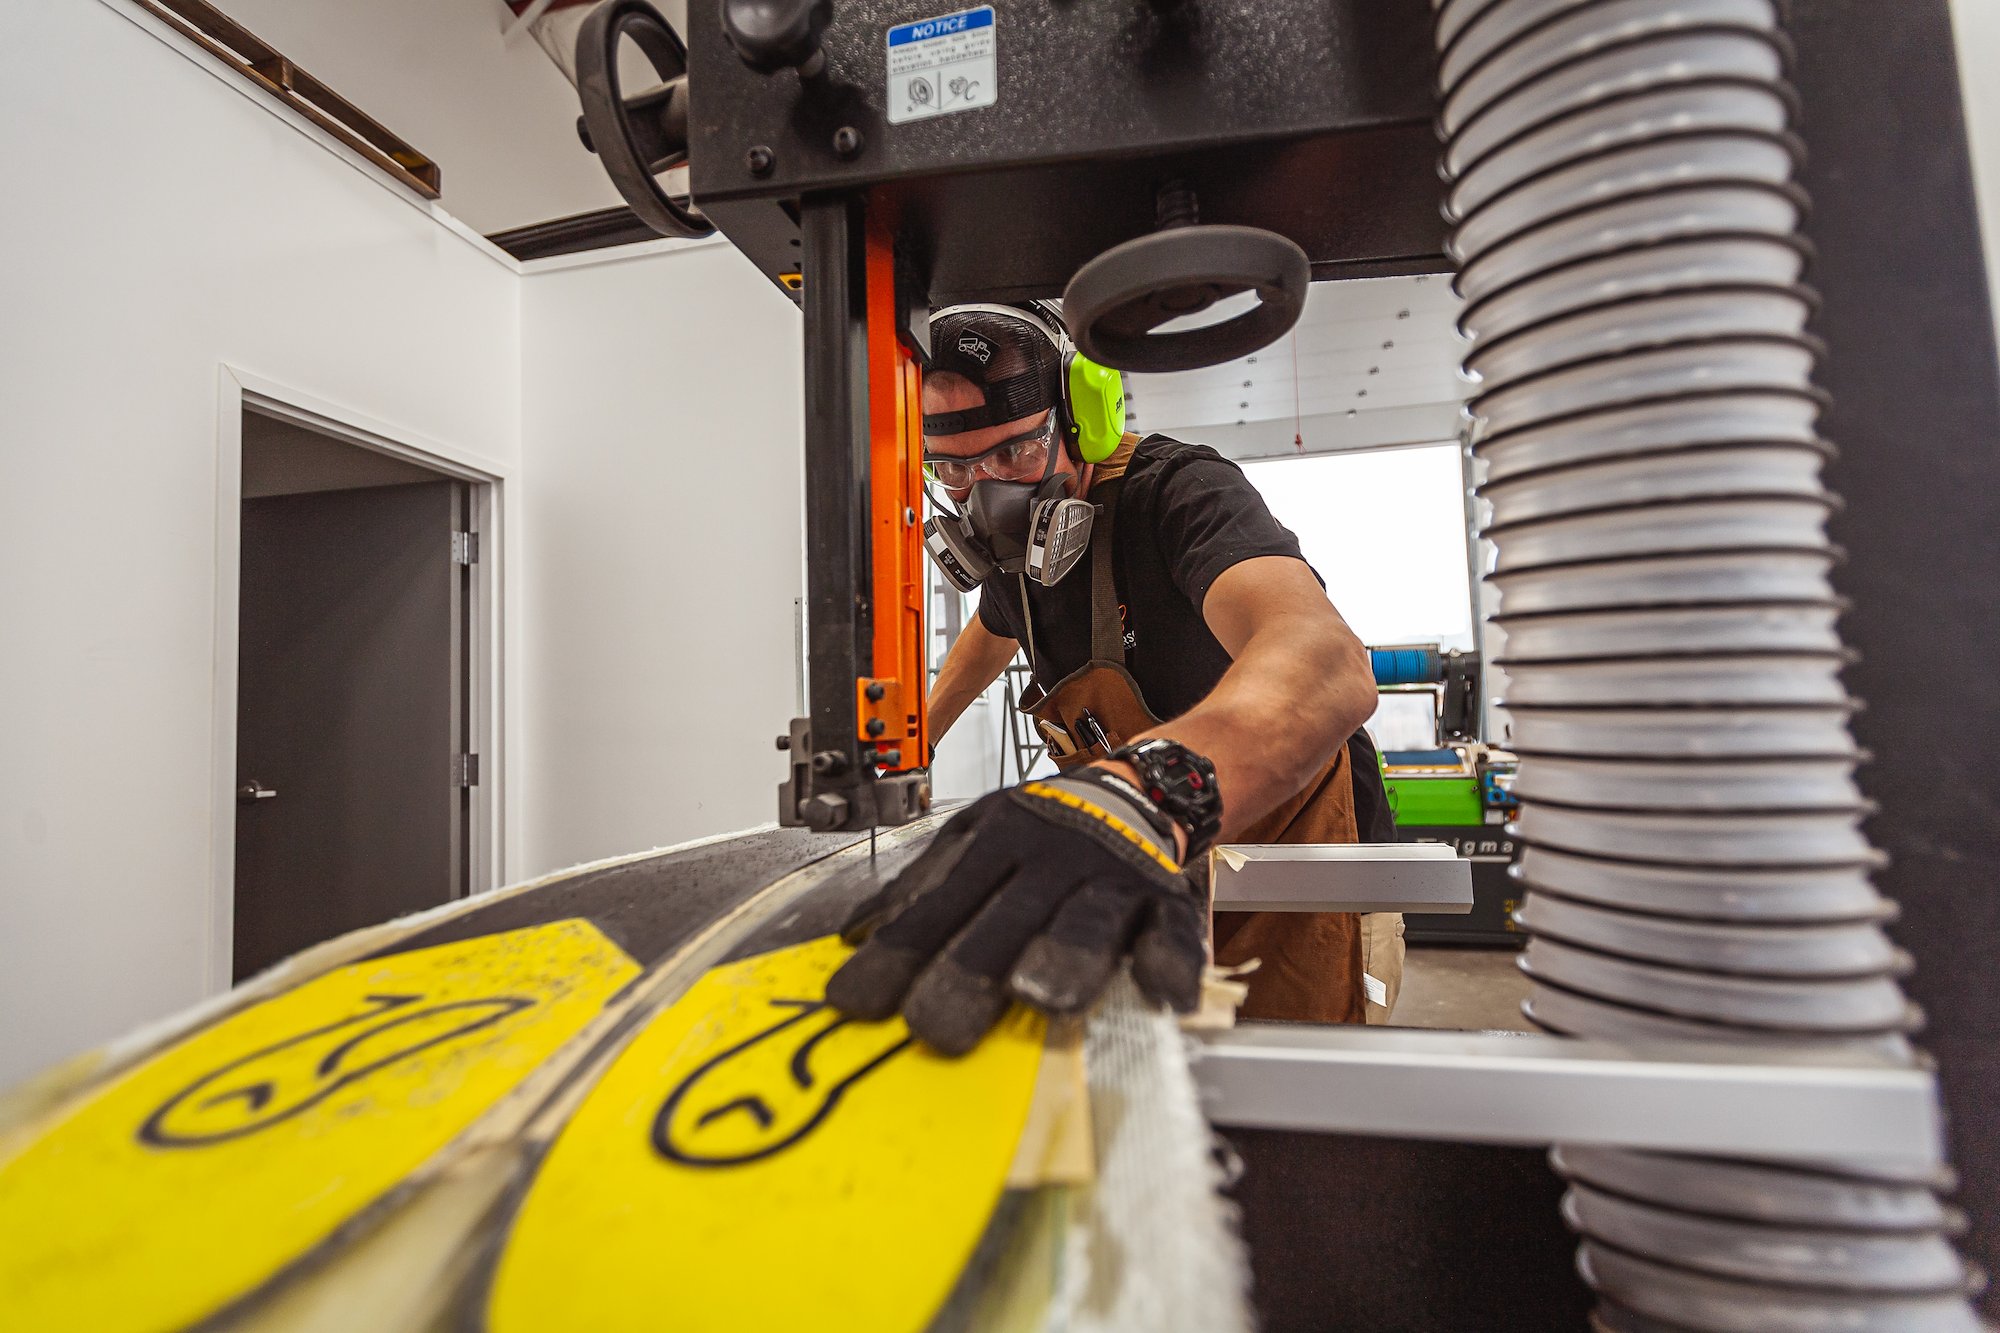 A technician developing skis.